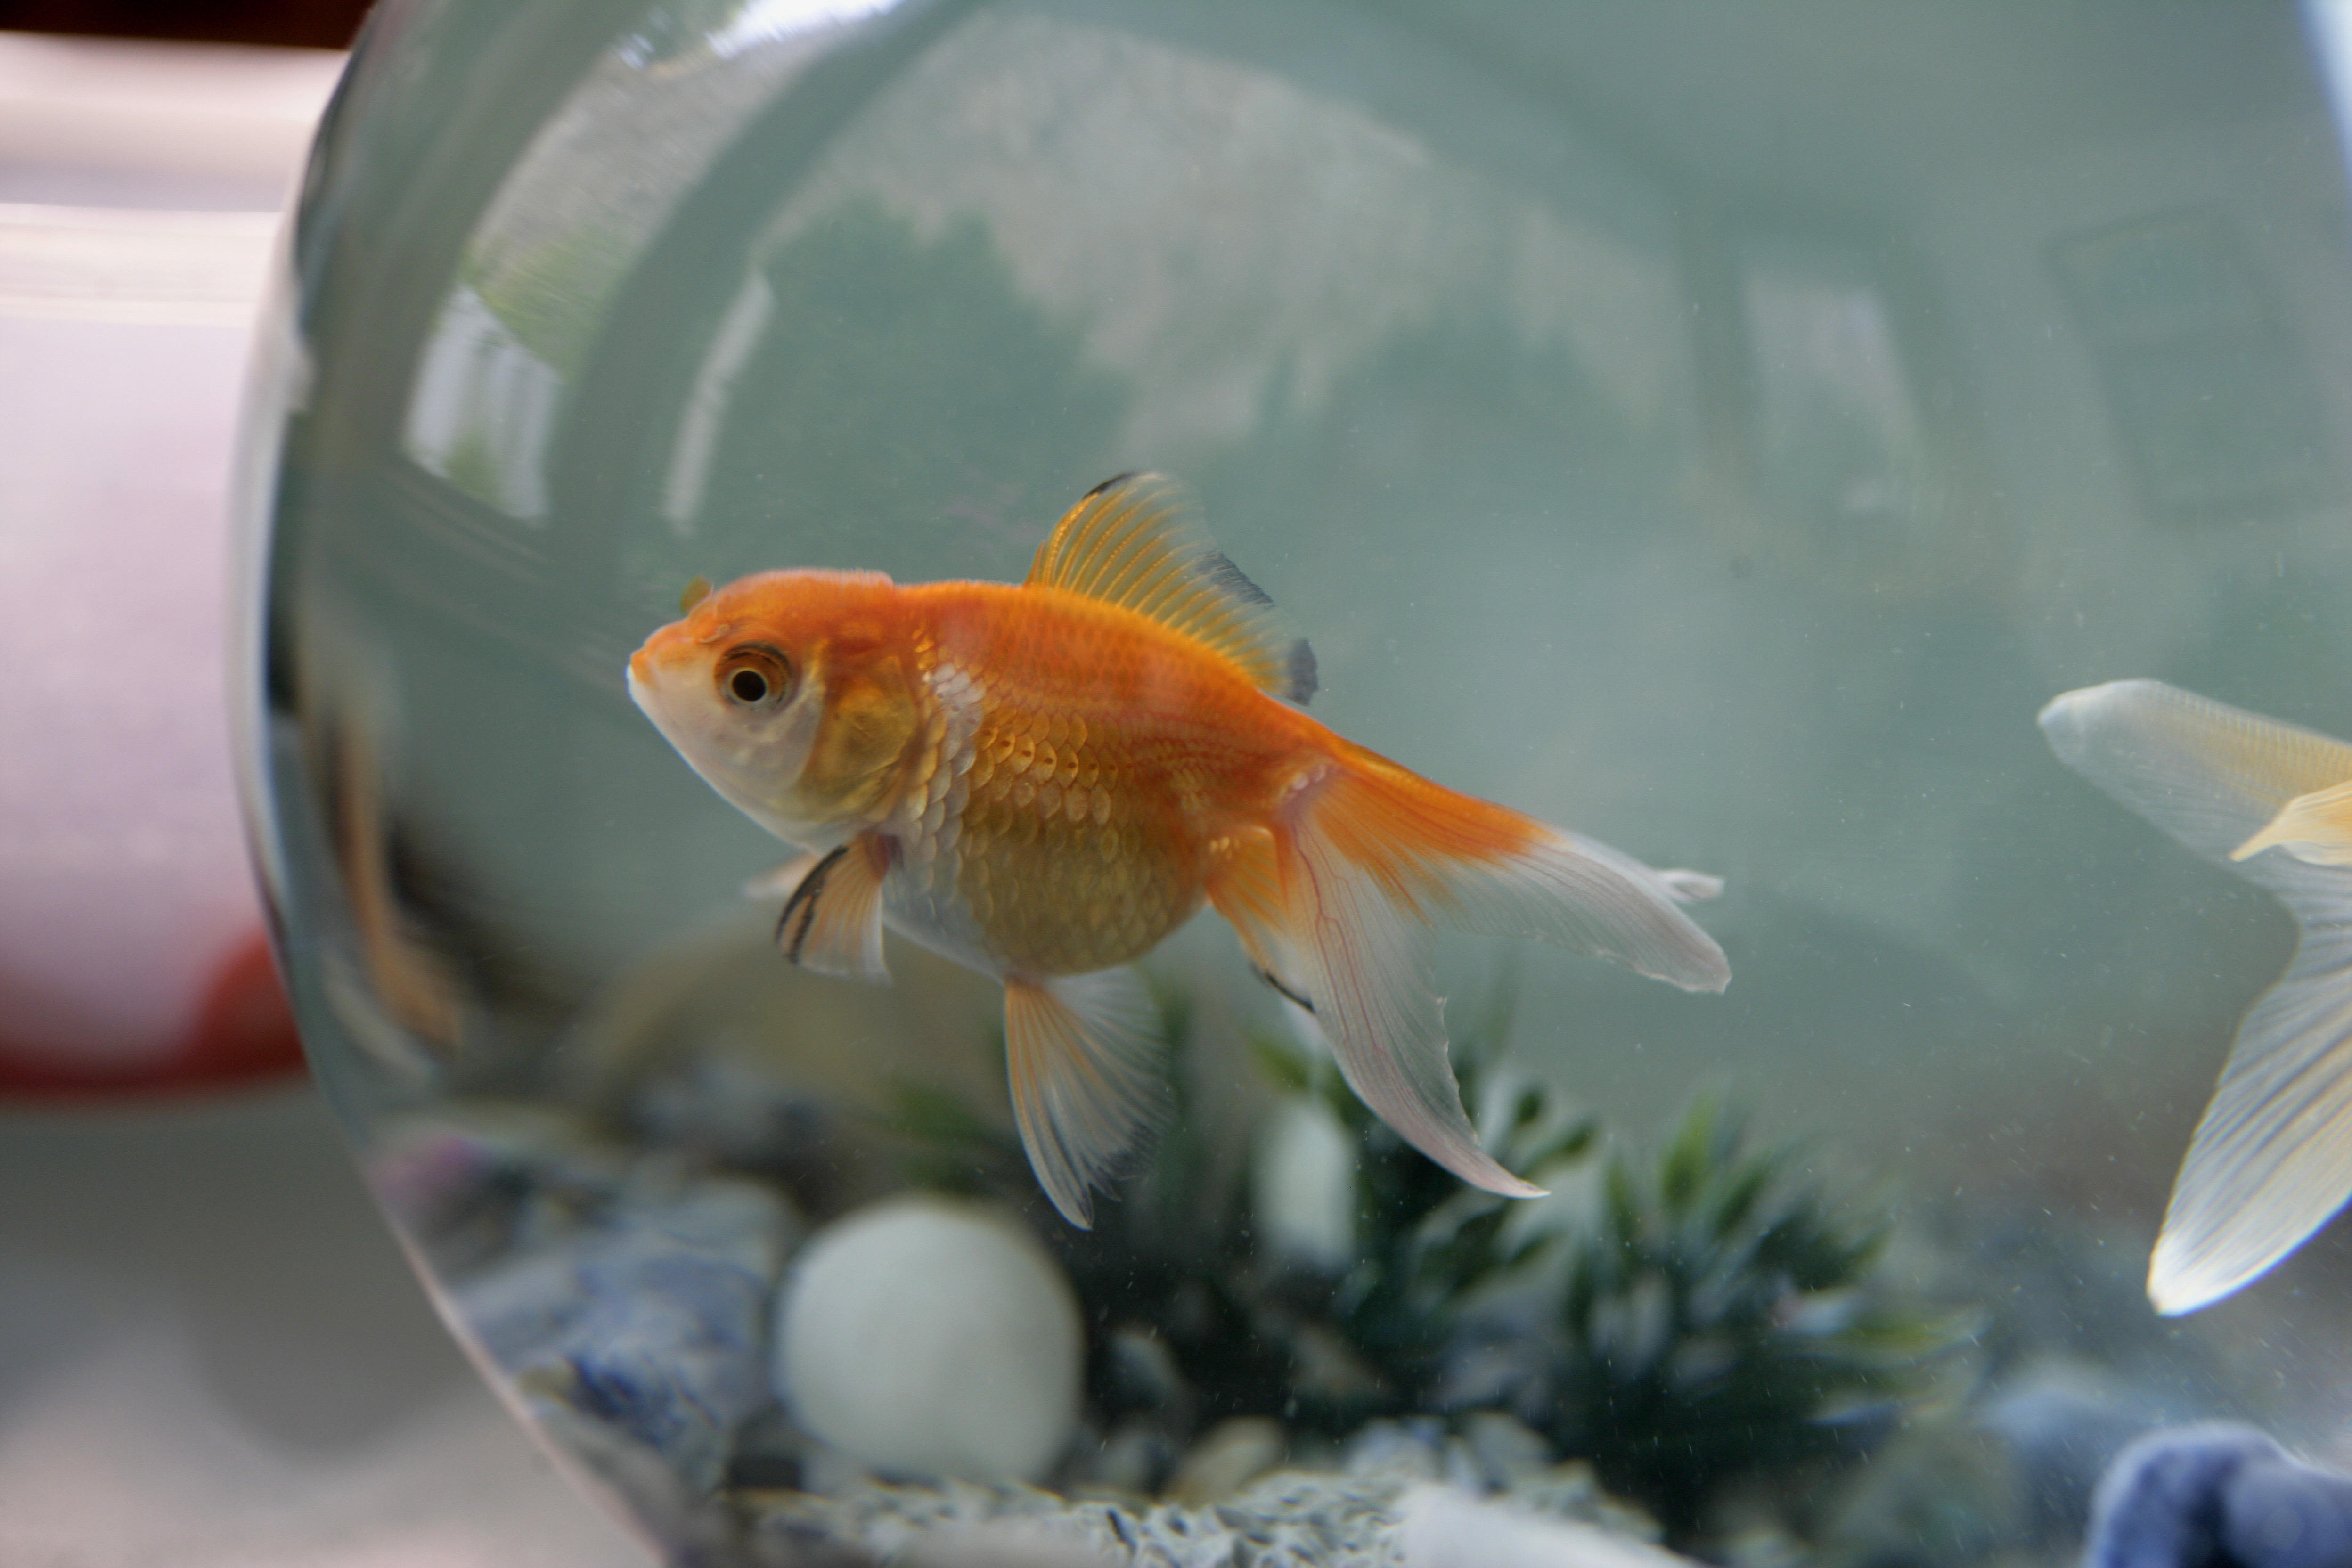 Mystery surrounds Alice, the goldfish found alive on a U.K. lawn